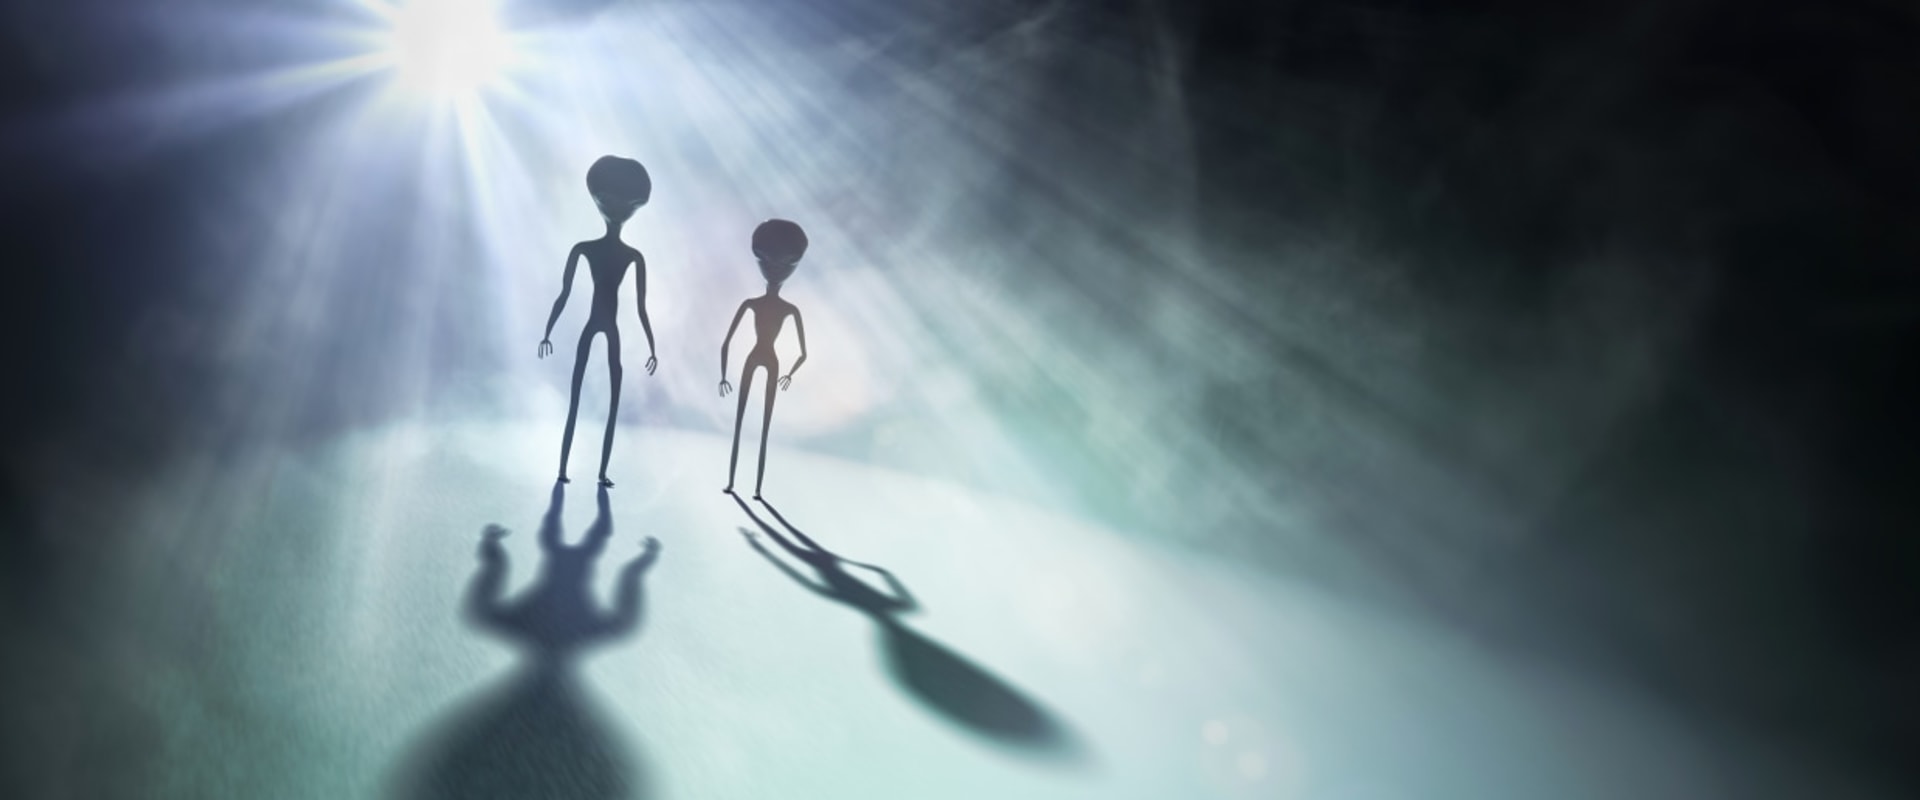 Possible Extraterrestrial Involvement in Human Evolution